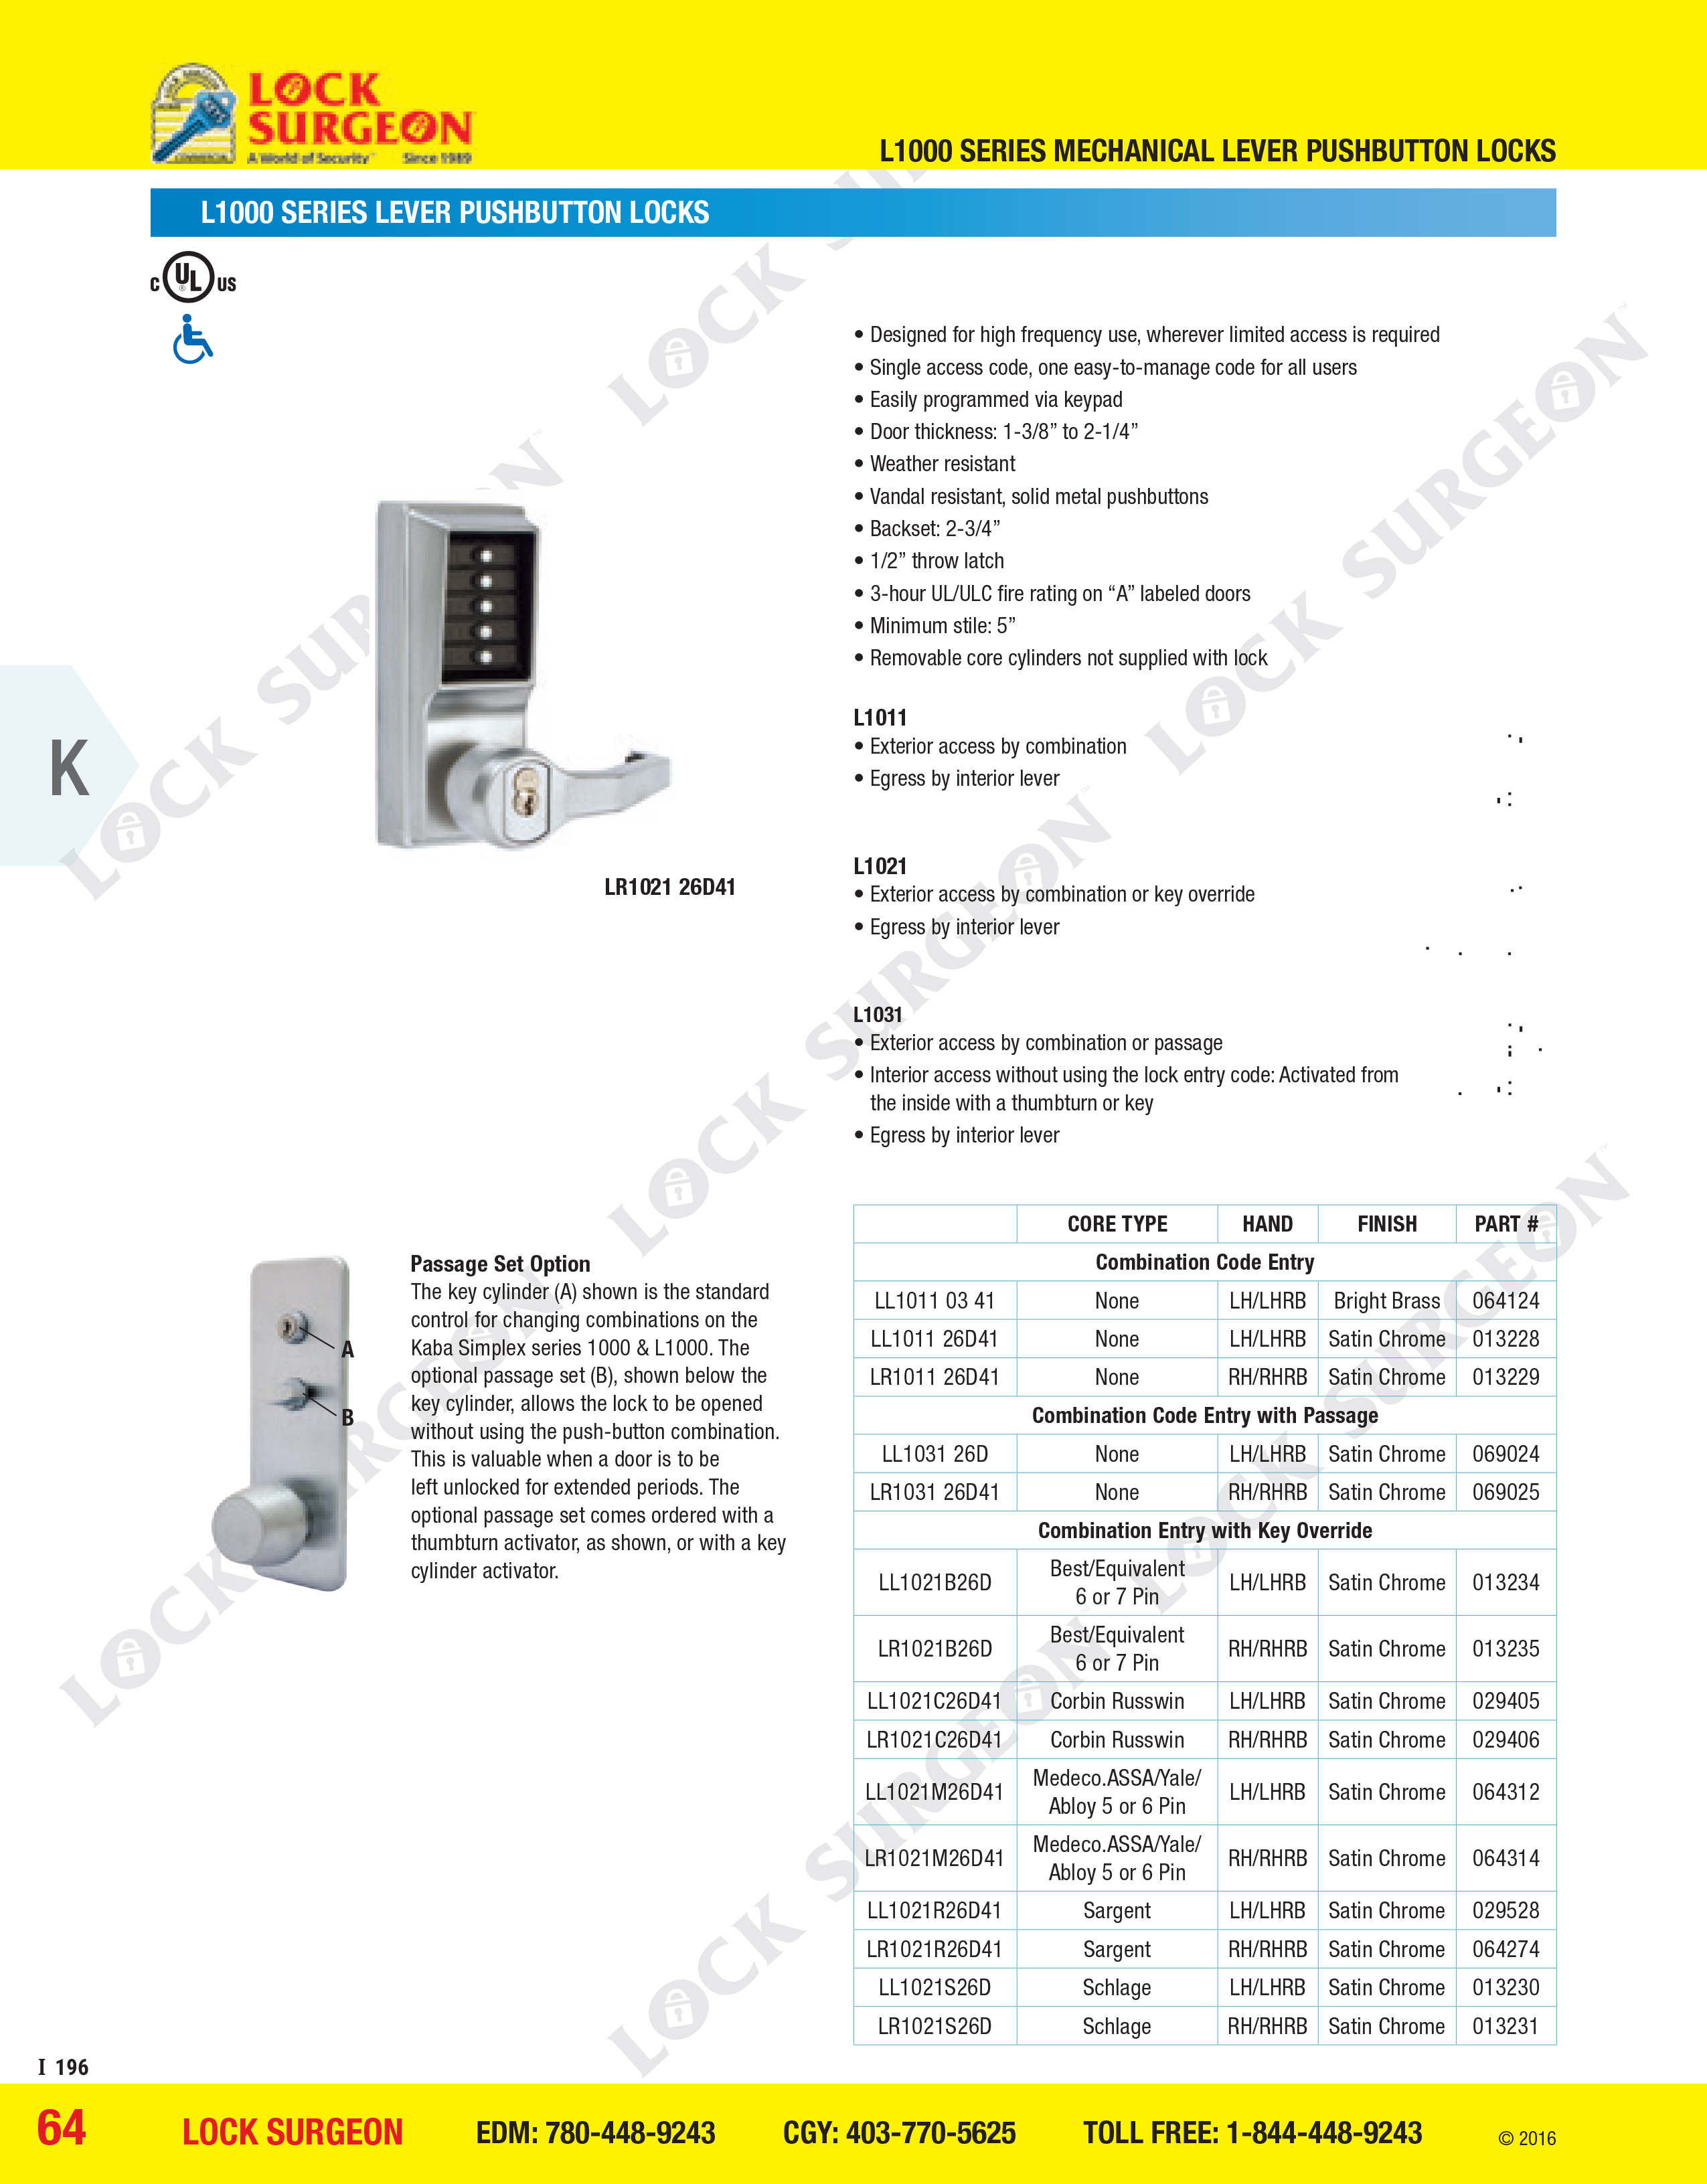 Airdrie Kaba-unican L-1000 series lever push-button locks.